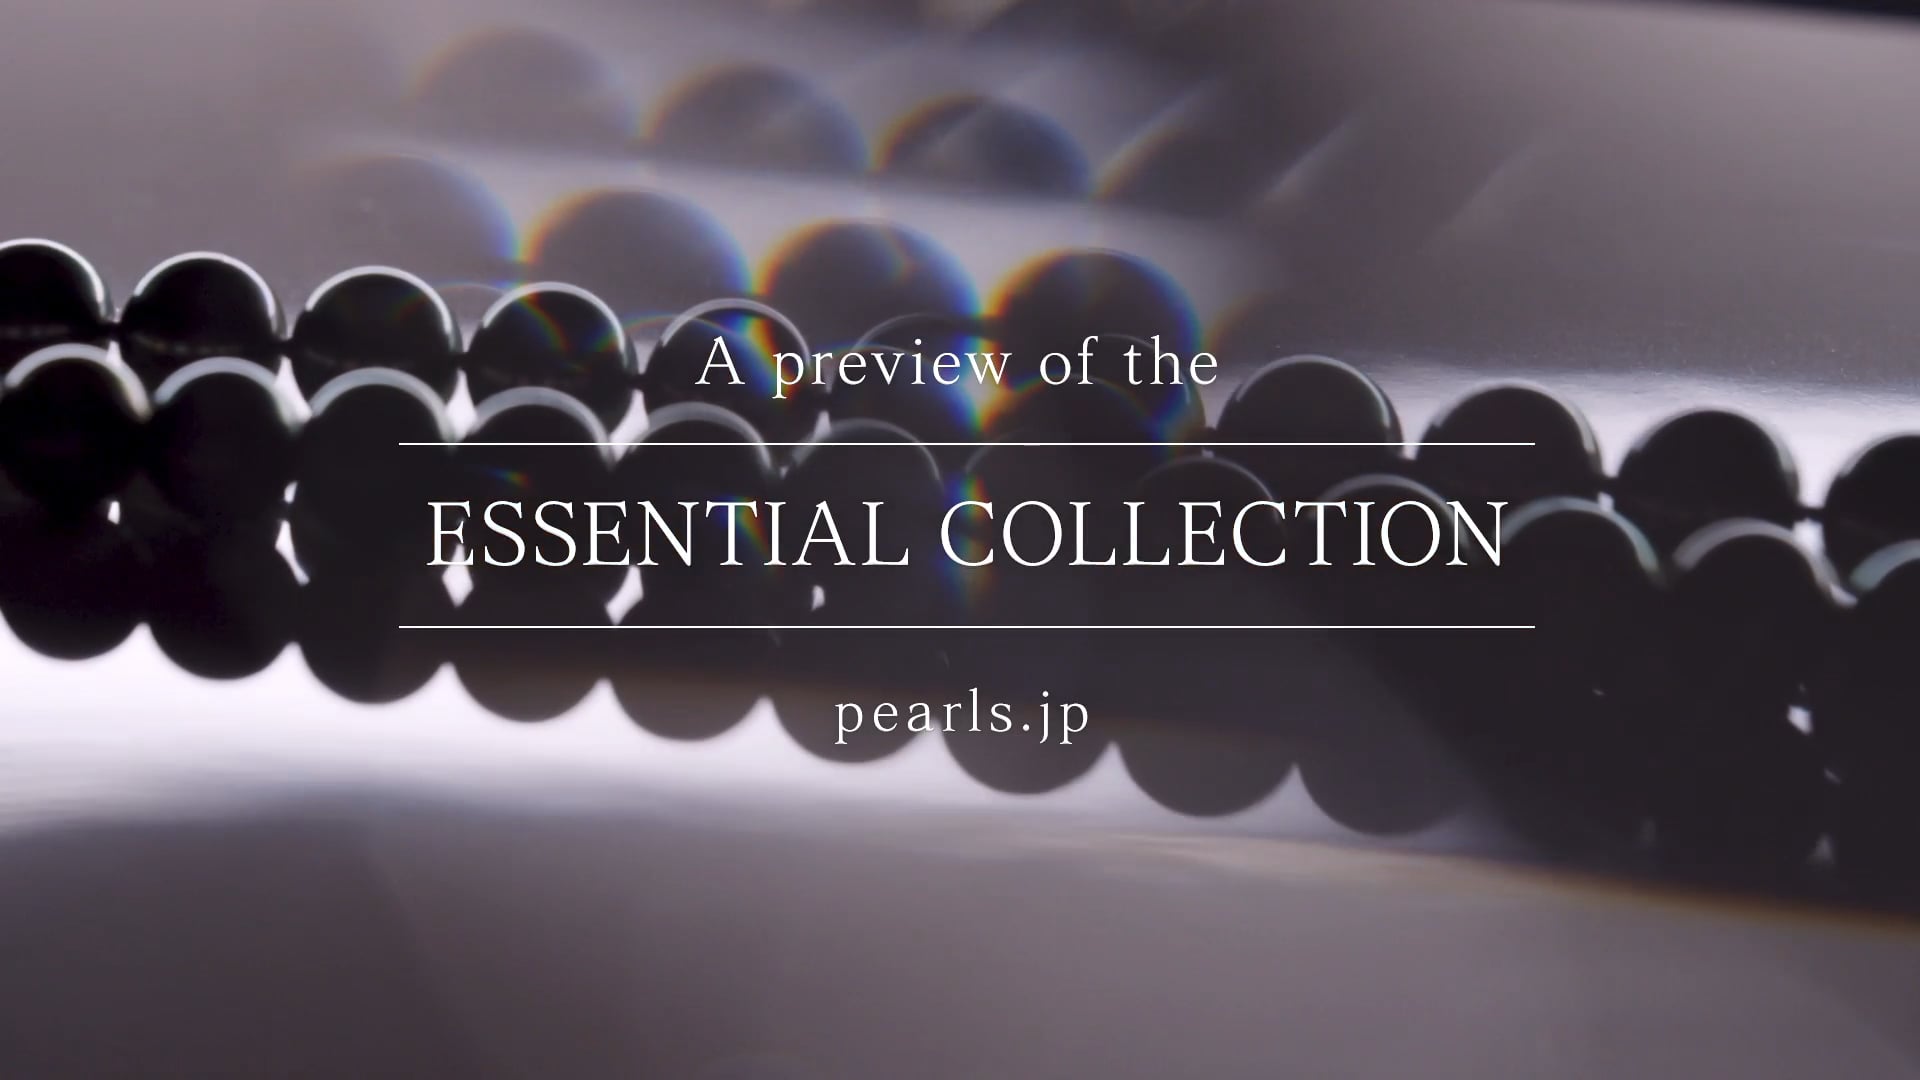 pearls.jp Brand Collection Film